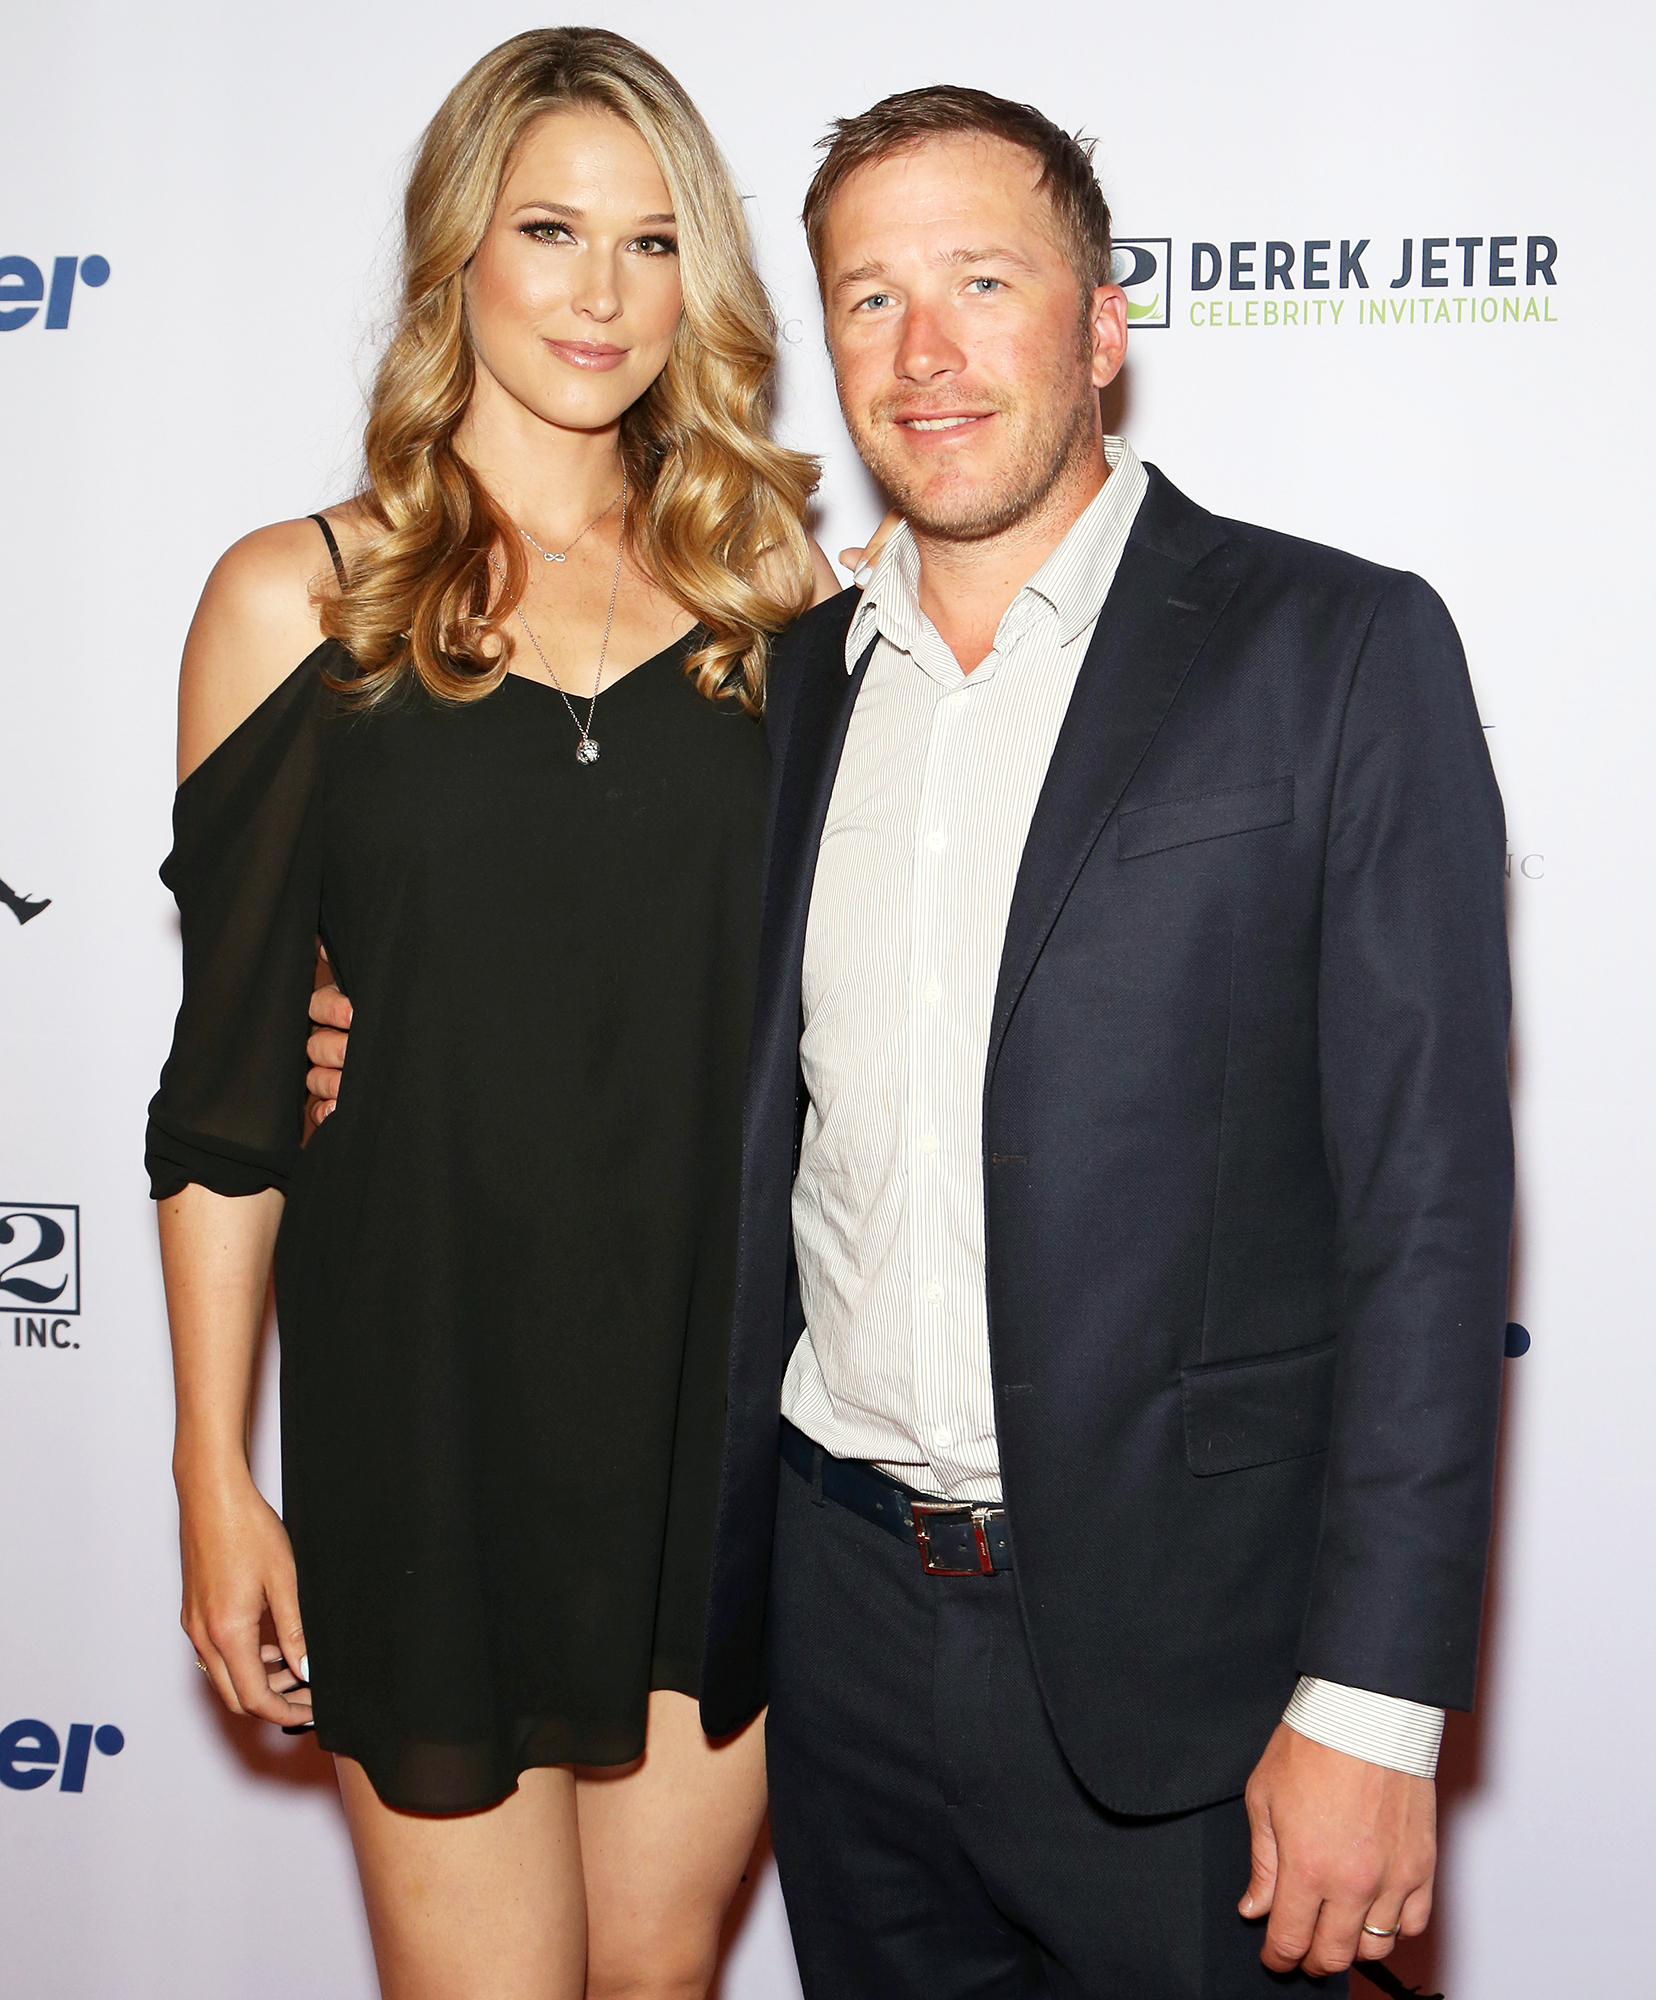 Bode and Morgan Miller Welcome Baby Boy After Daughter's Death